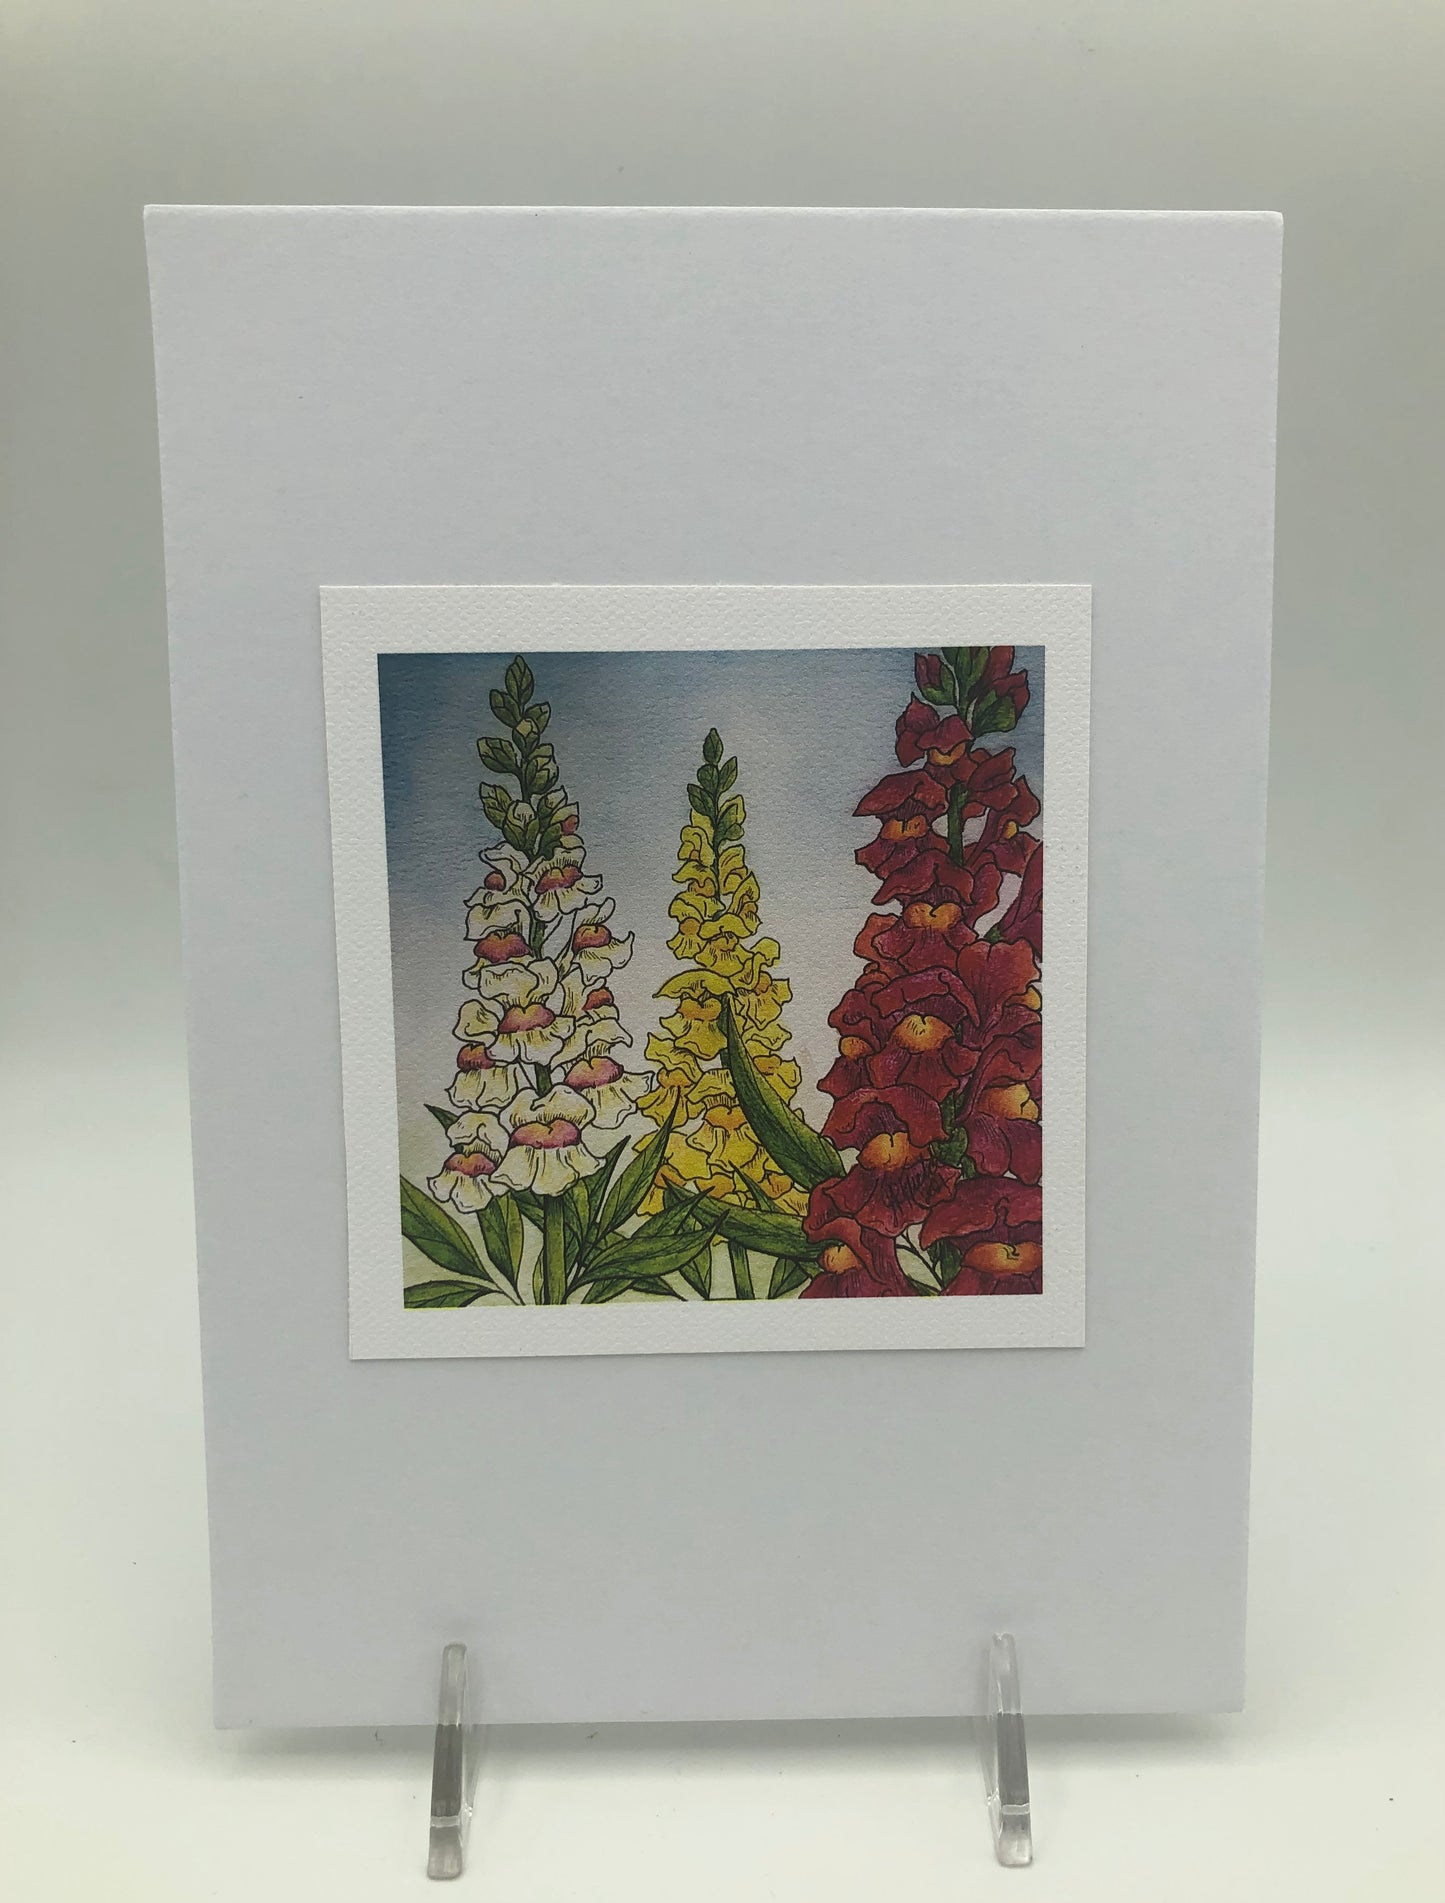 Snapdragons from Blossoms & Blooms Vol 1